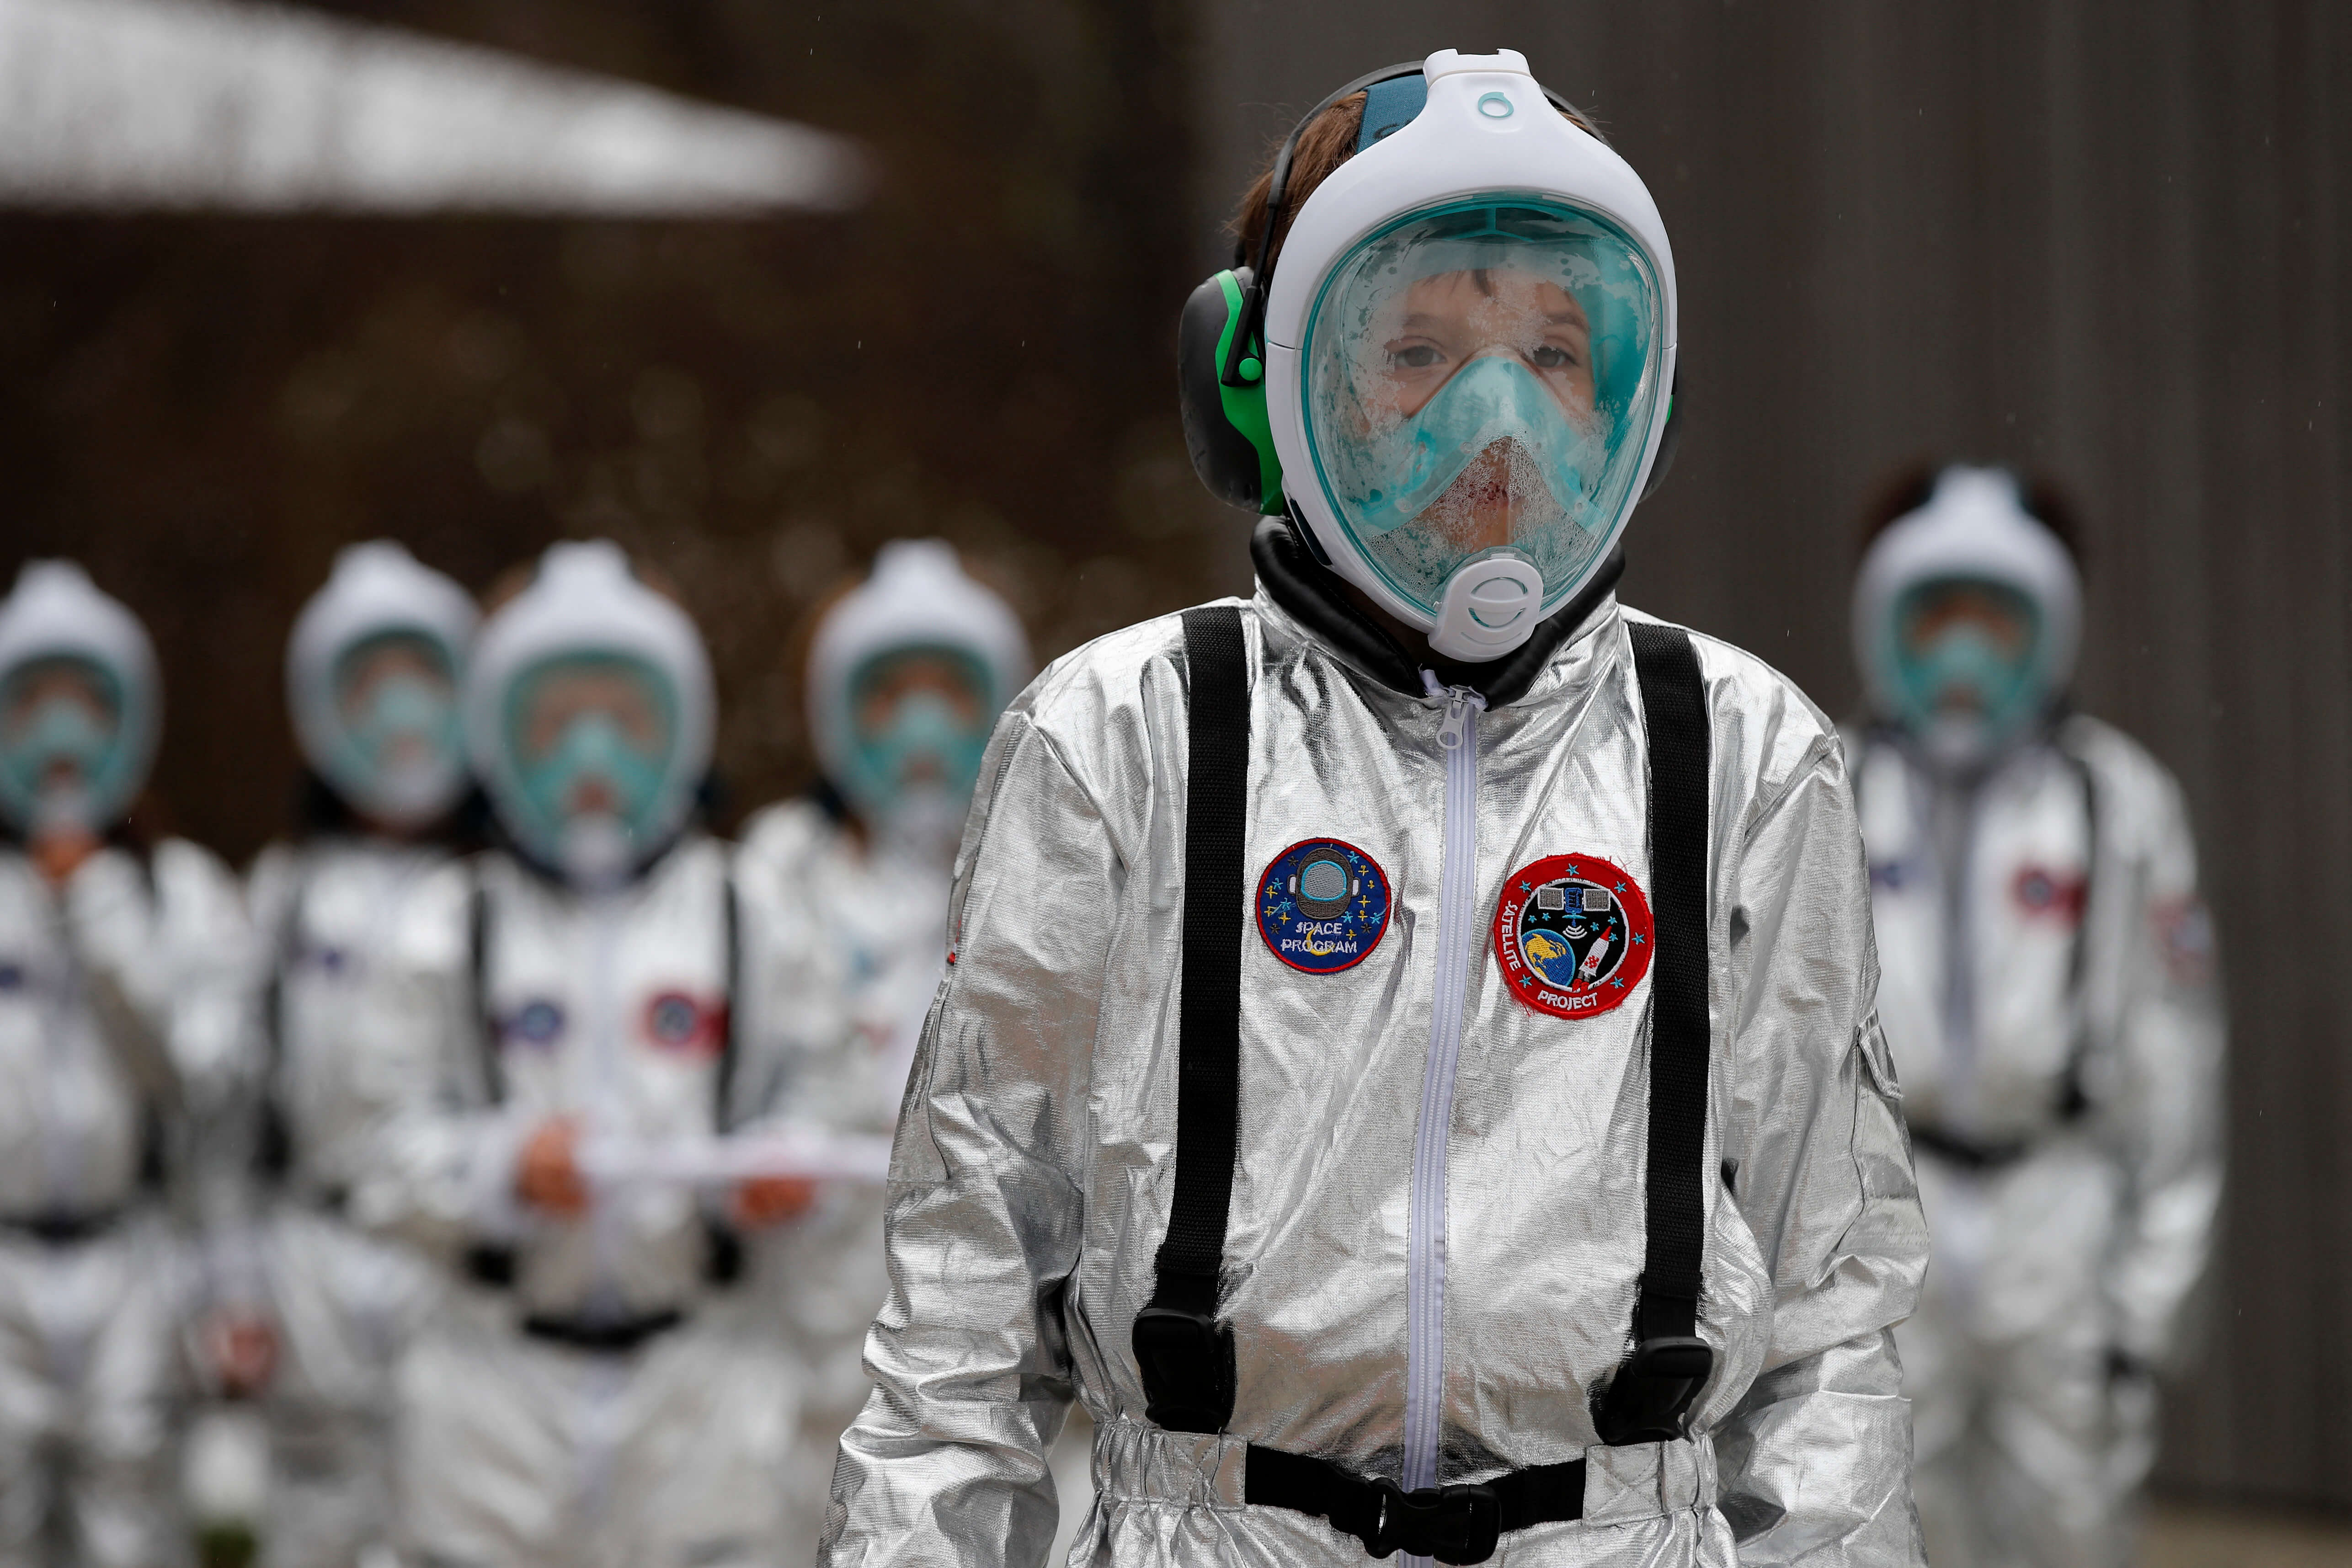 Swiss kids suit up for 'Mission to Mars'